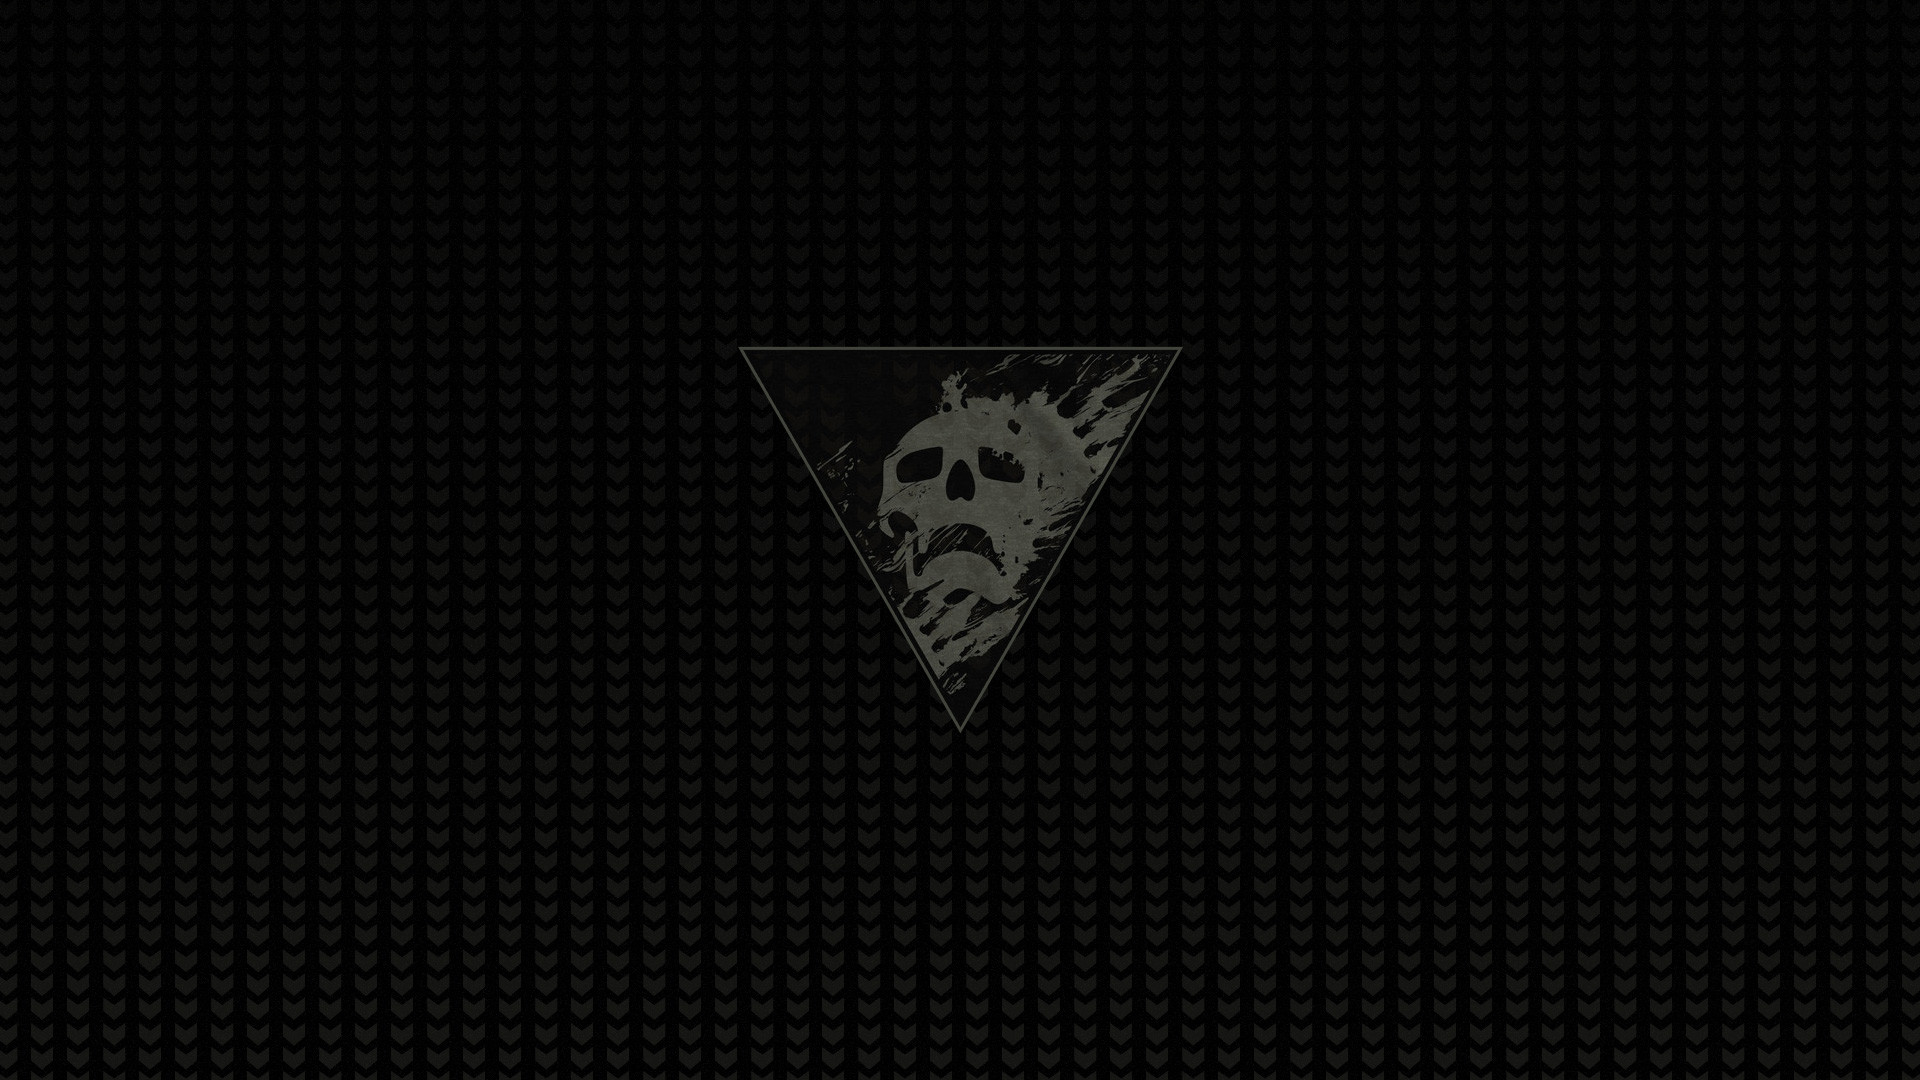 Really Wanted A Wallpaper With The Darkness Zone Icon On It So I Made